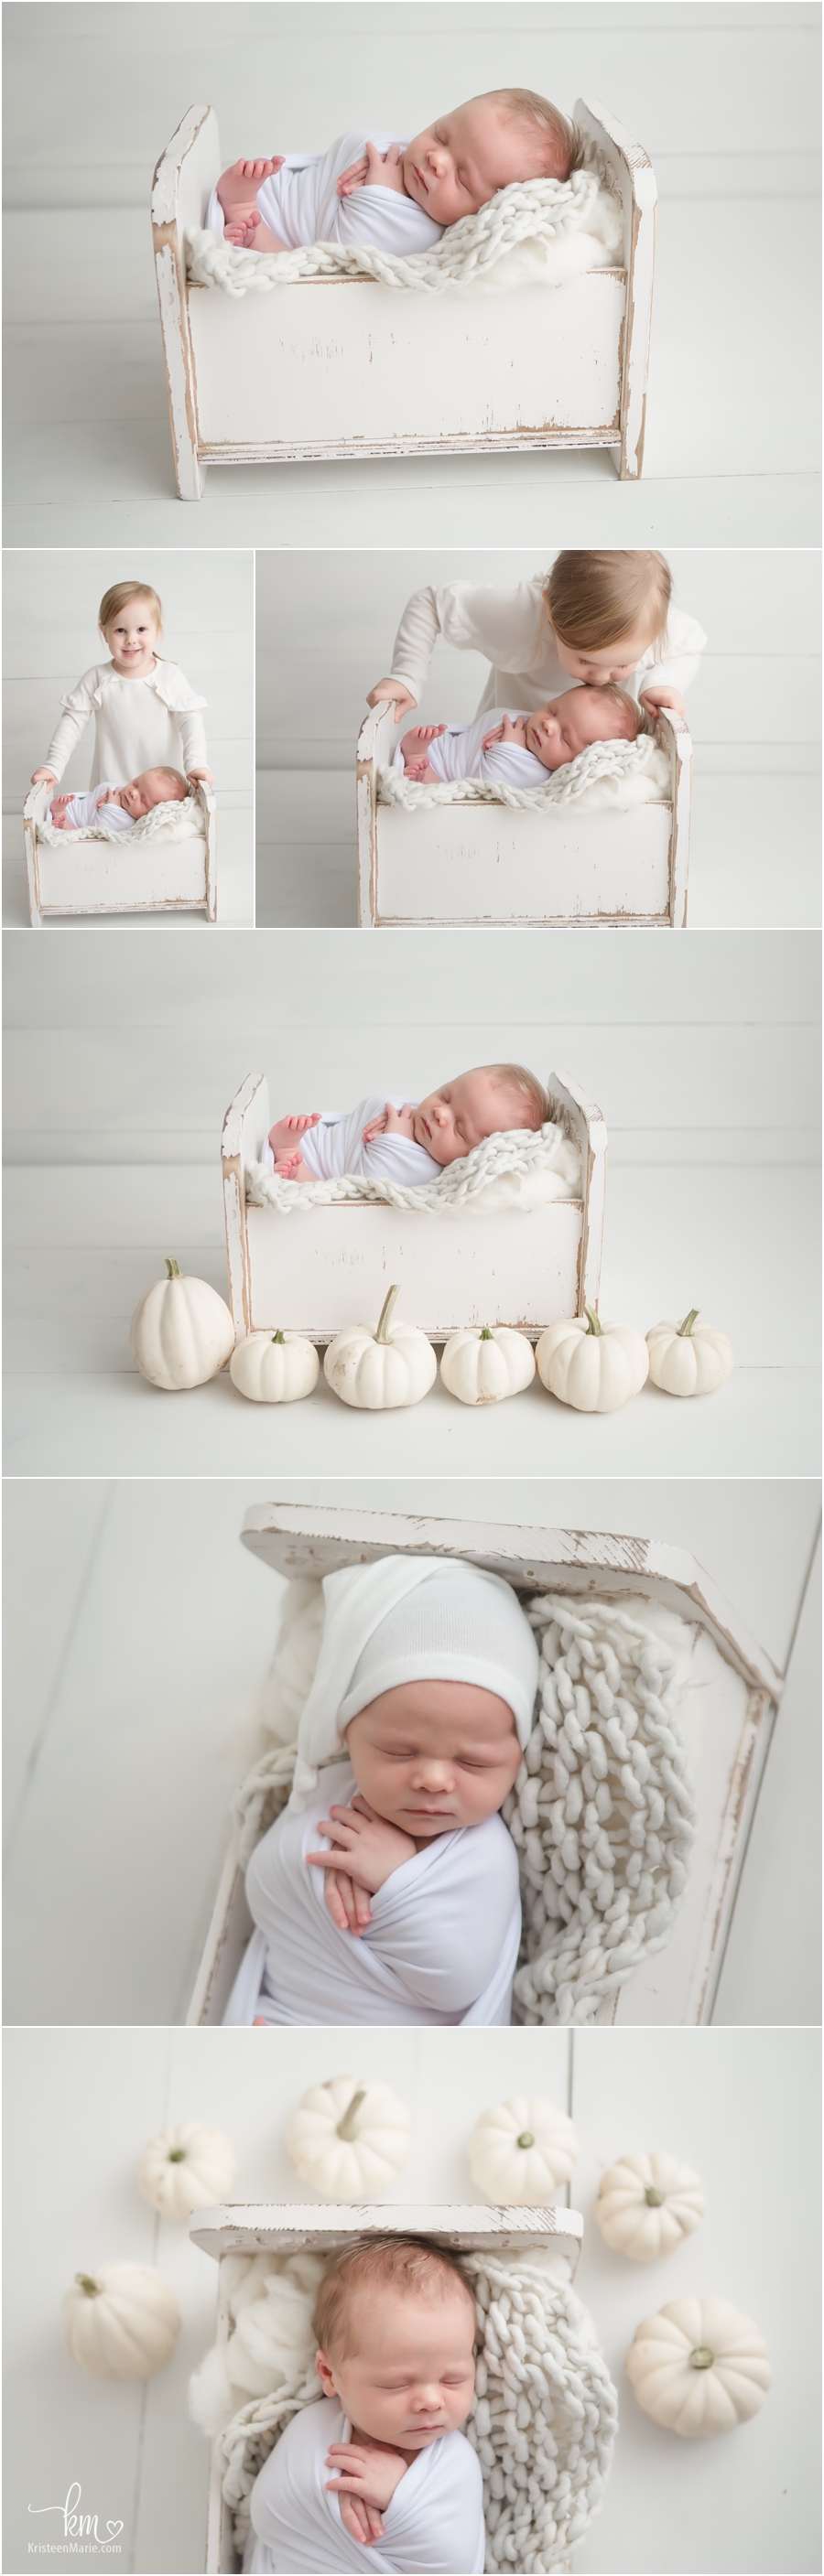 white and cream newborn pictures - siblings and halloween - neutral colors - so sweet!